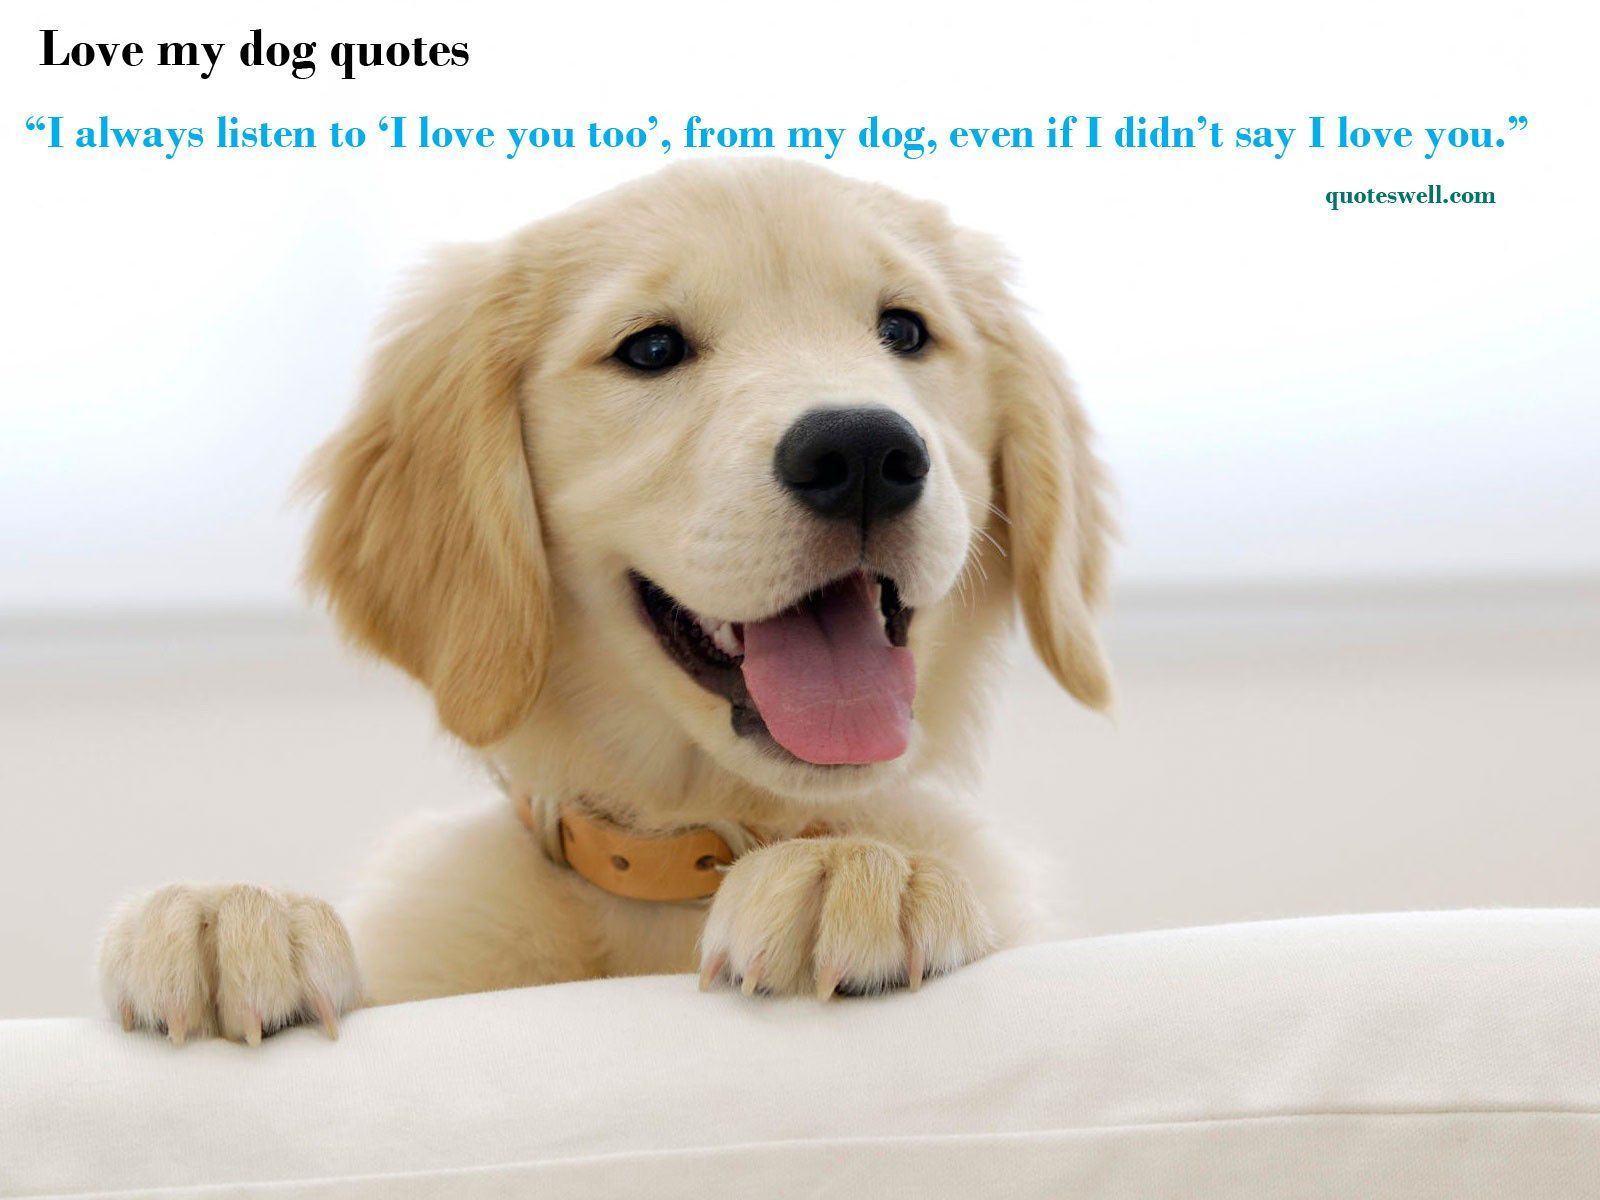 Elegant Dog Love Quotes and Sayings. Love quotes collection within HD image